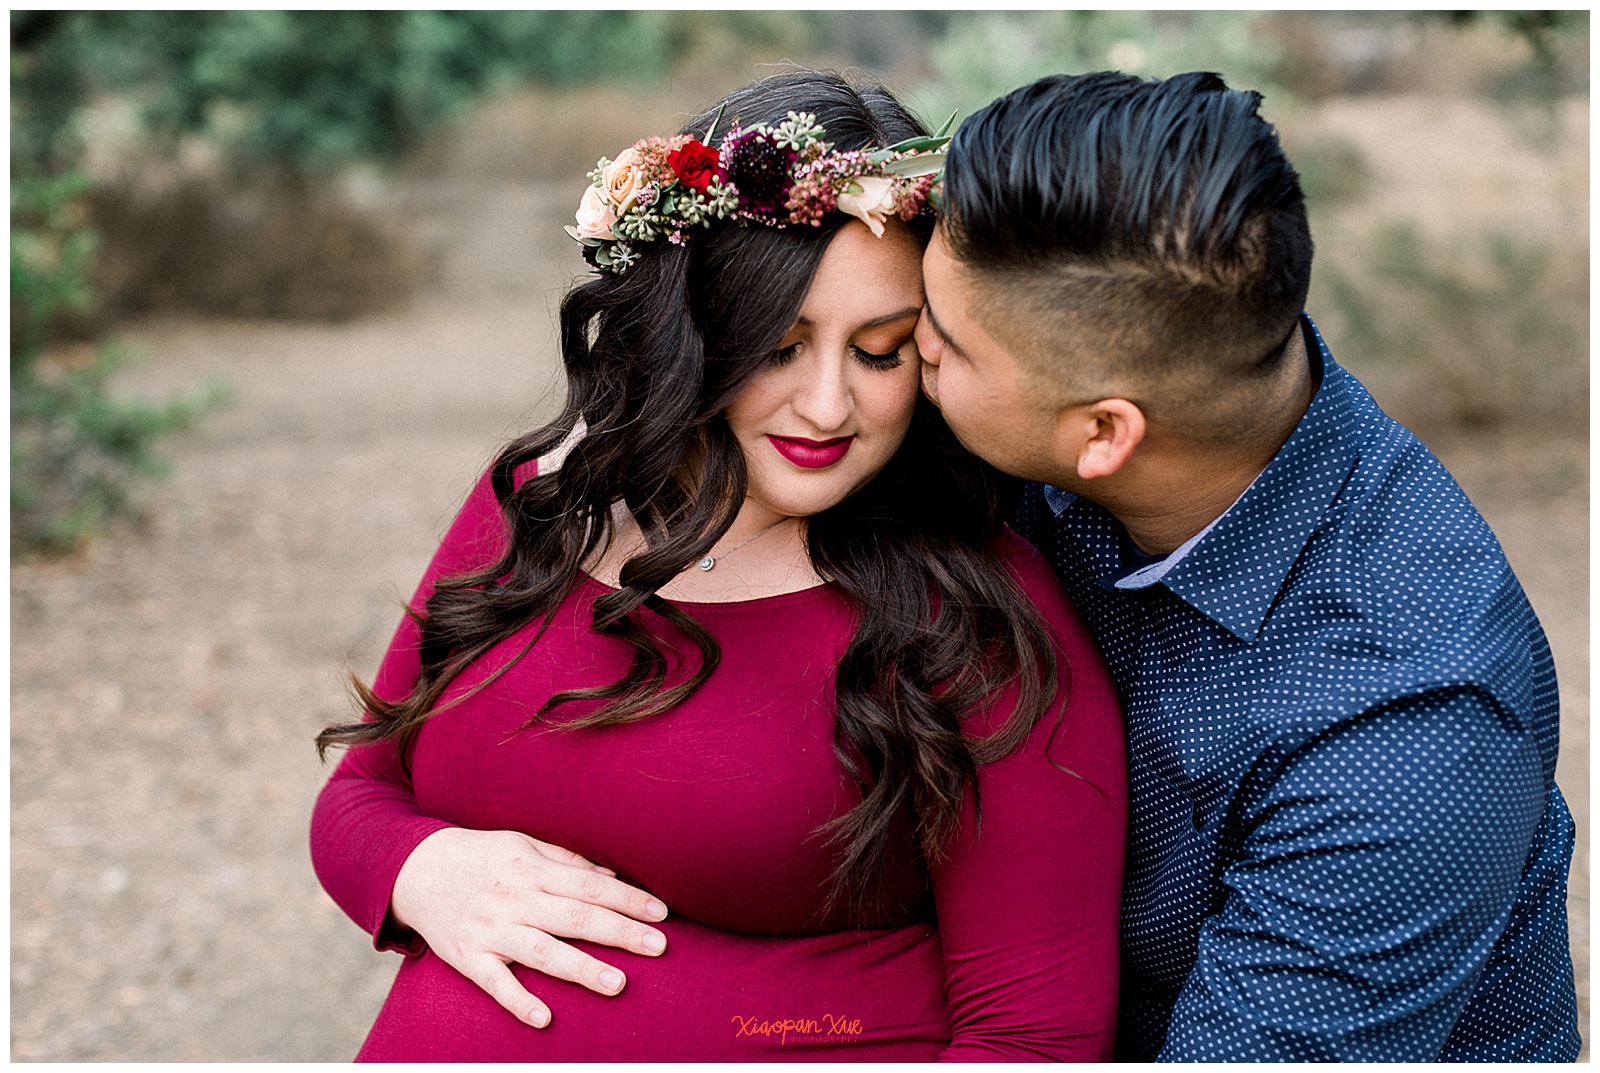 An image of an interracial couple (an Asian male and a Latina female). The male is hugging her from the side and kissing her temple. The female has her hand on her expectant belly.